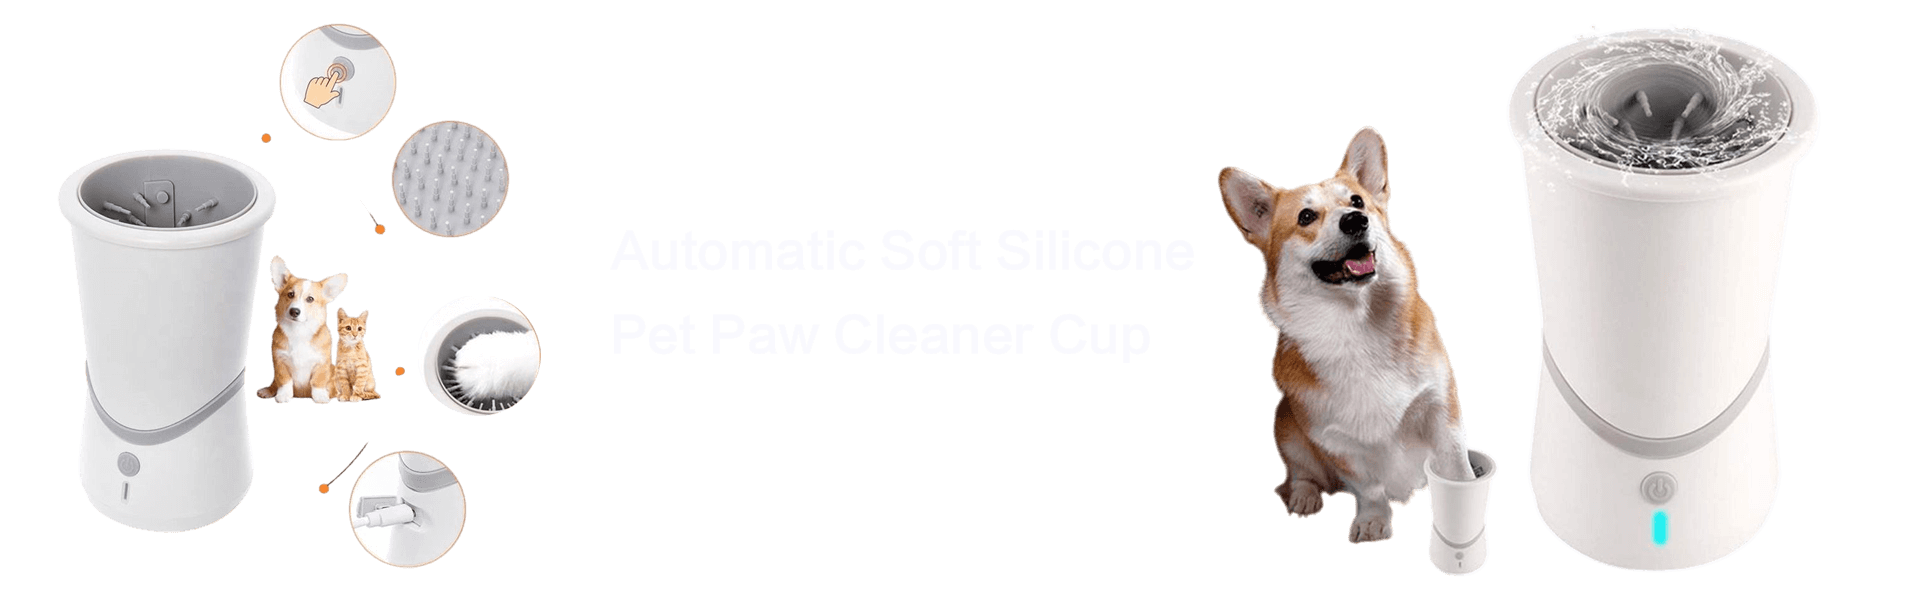 Automatic Soft Silicone Pet Paw Cleaner Cup